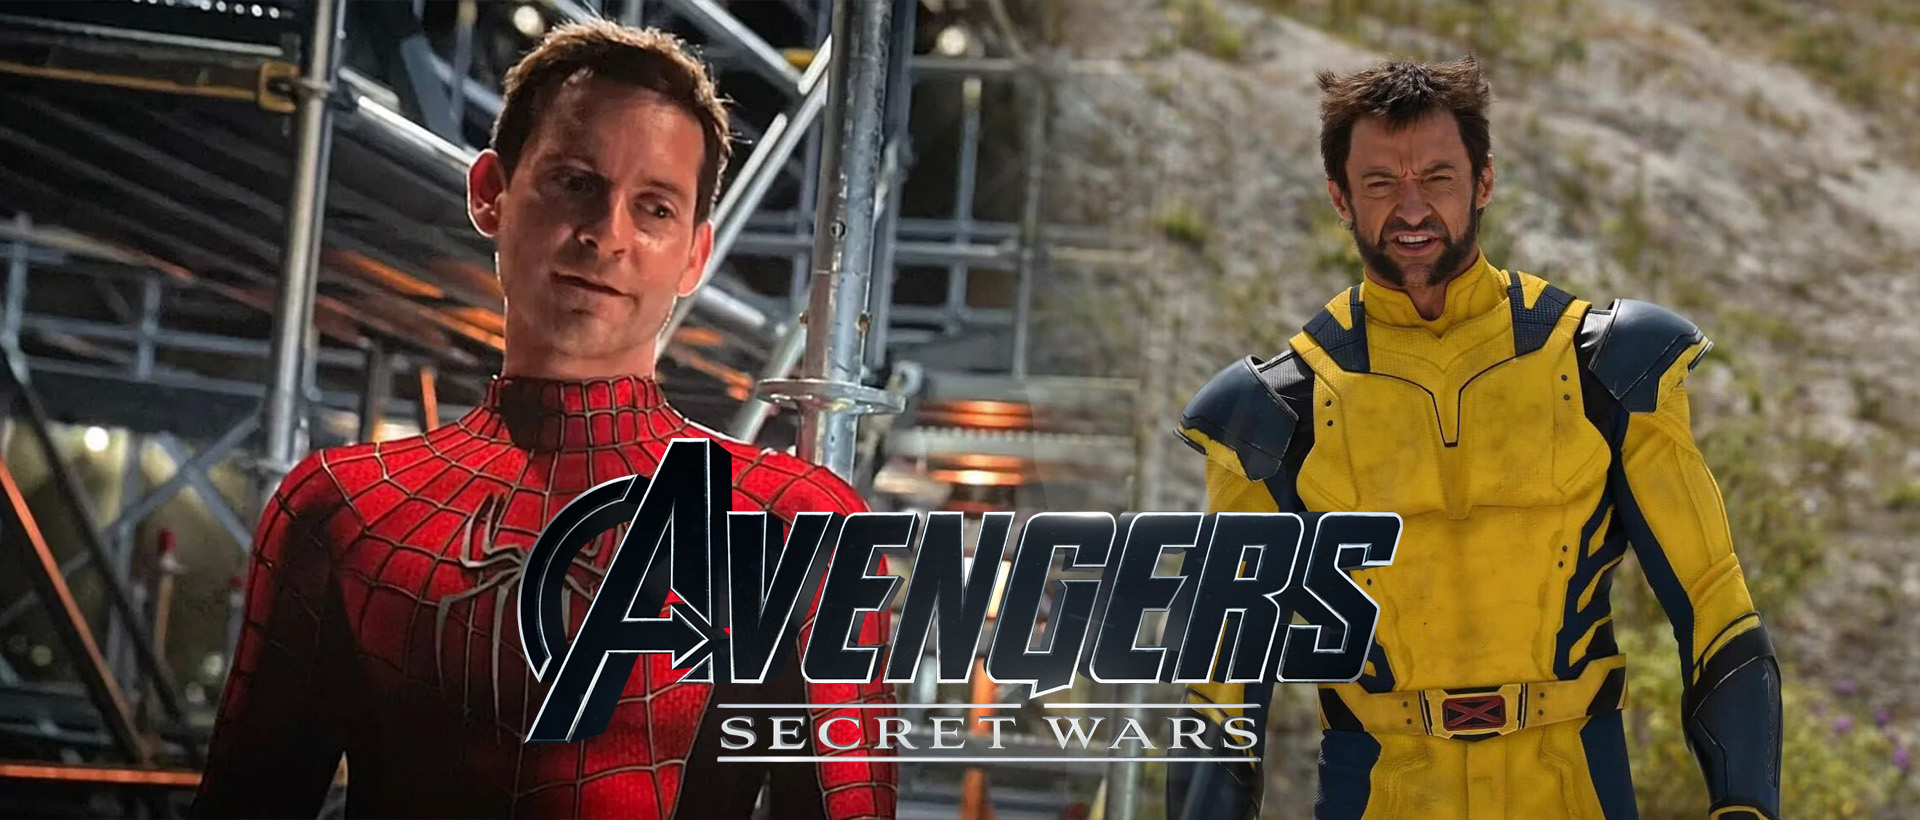 RUMOR: Kevin Feige Has Already Spoken To Tobey Maguire & Hugh